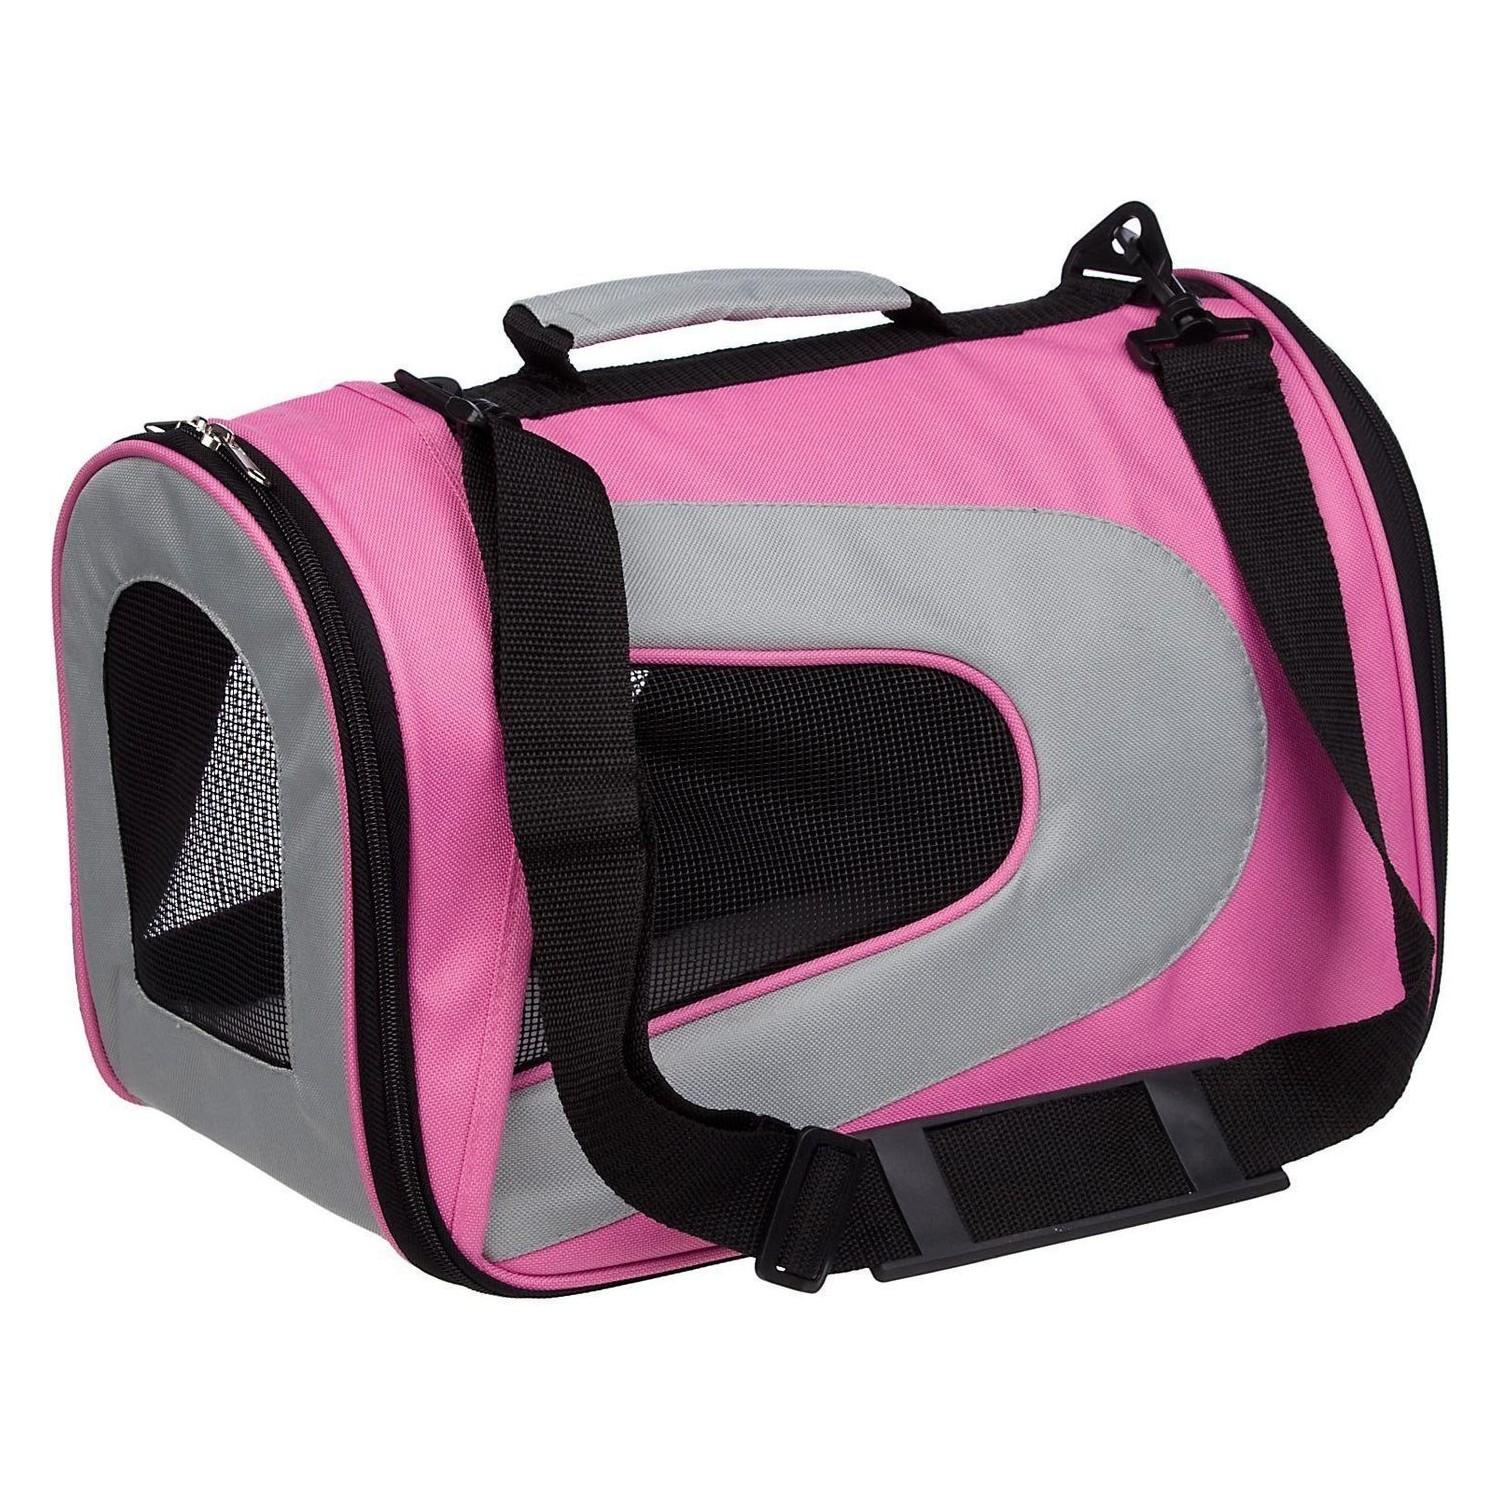 Pet Life Sporty Mesh Collapsible Dog Carrier - Pink/Gray